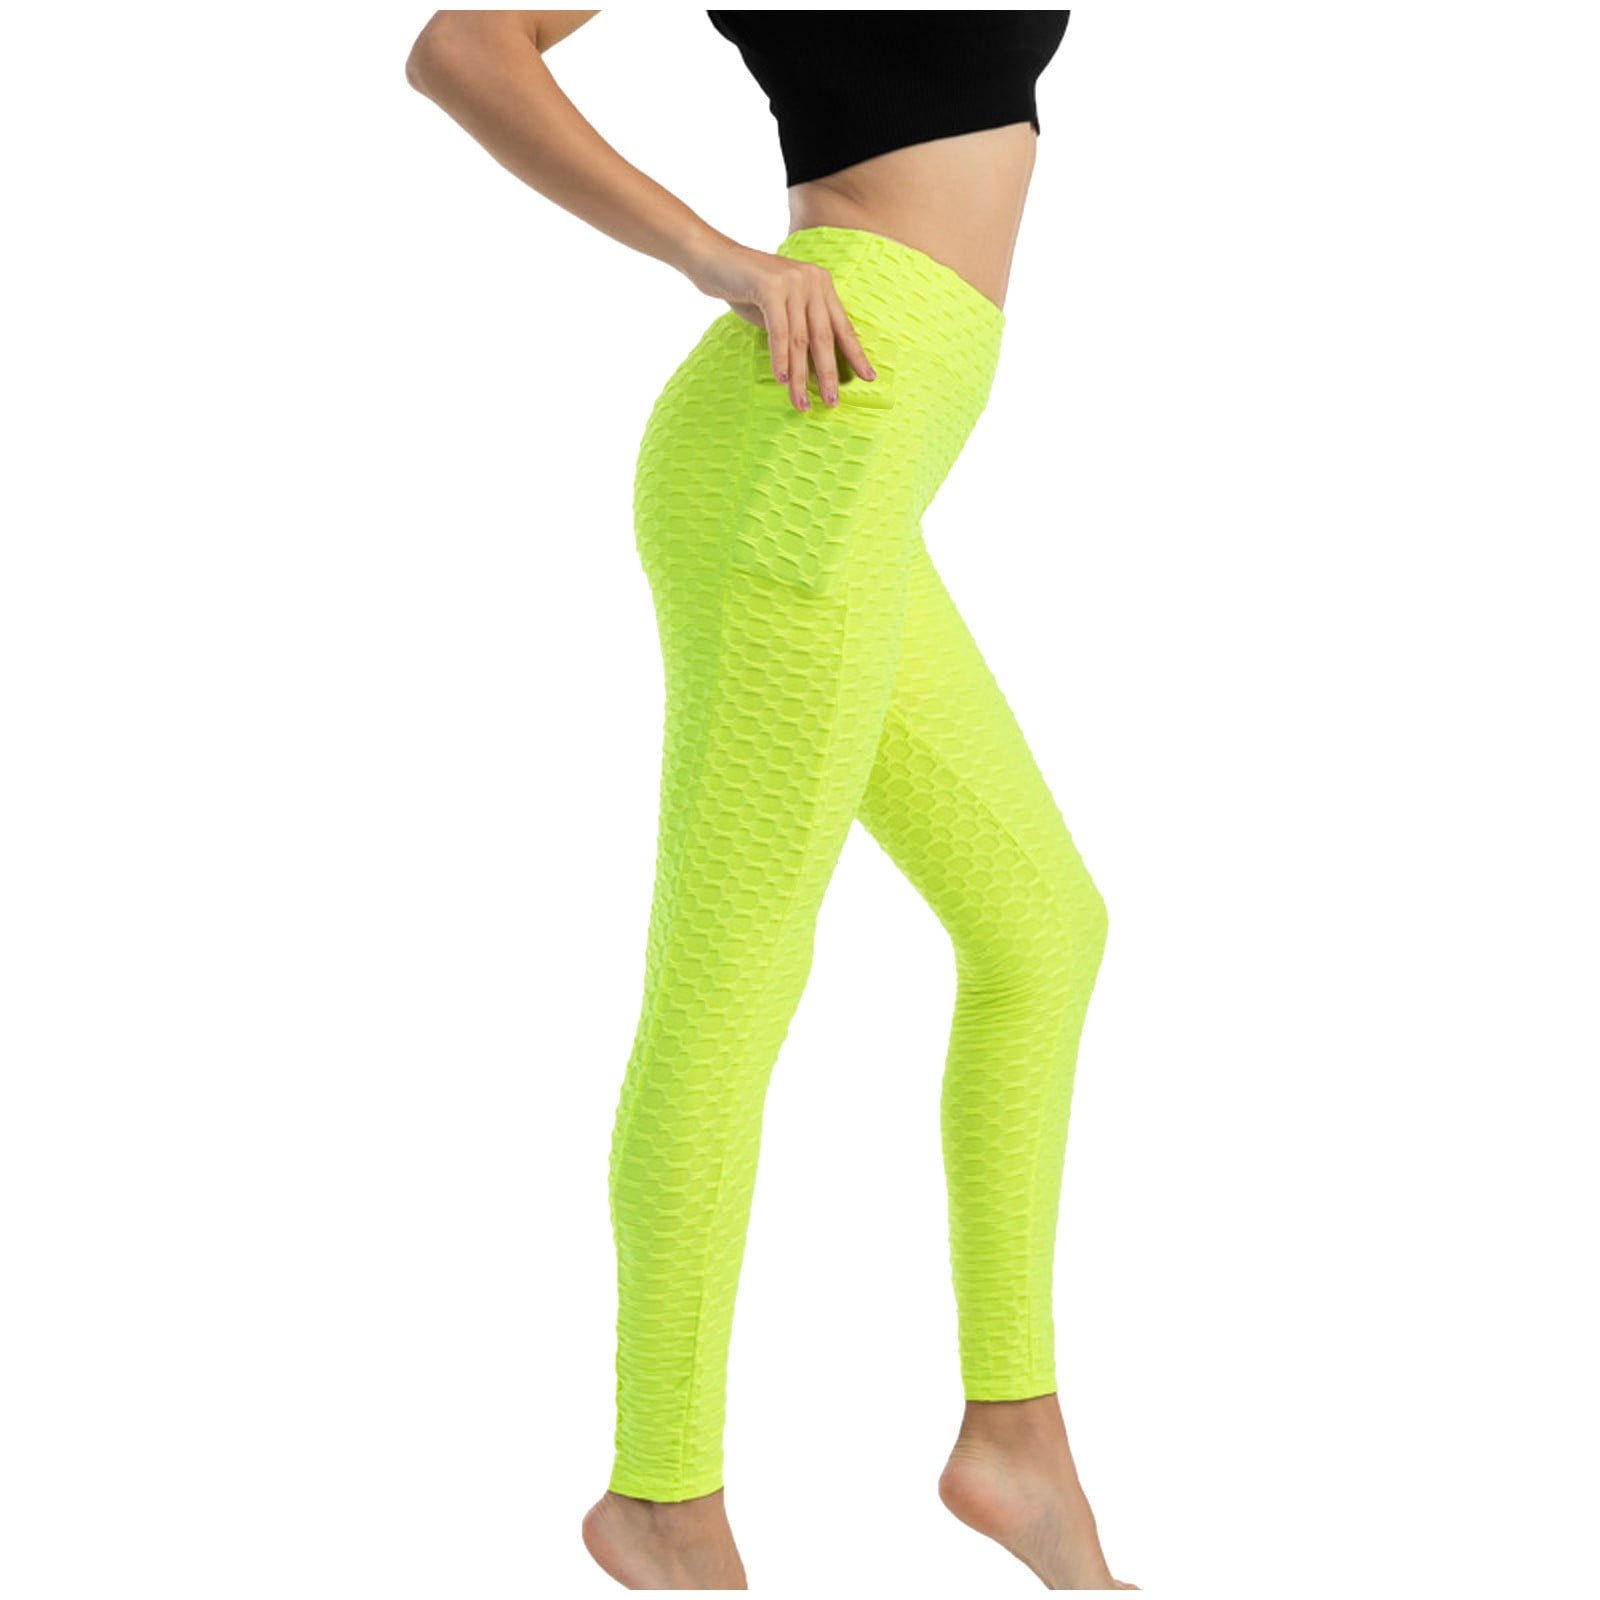 YWDJ Tights for Women Workout Gym Running Sports Yogalicious